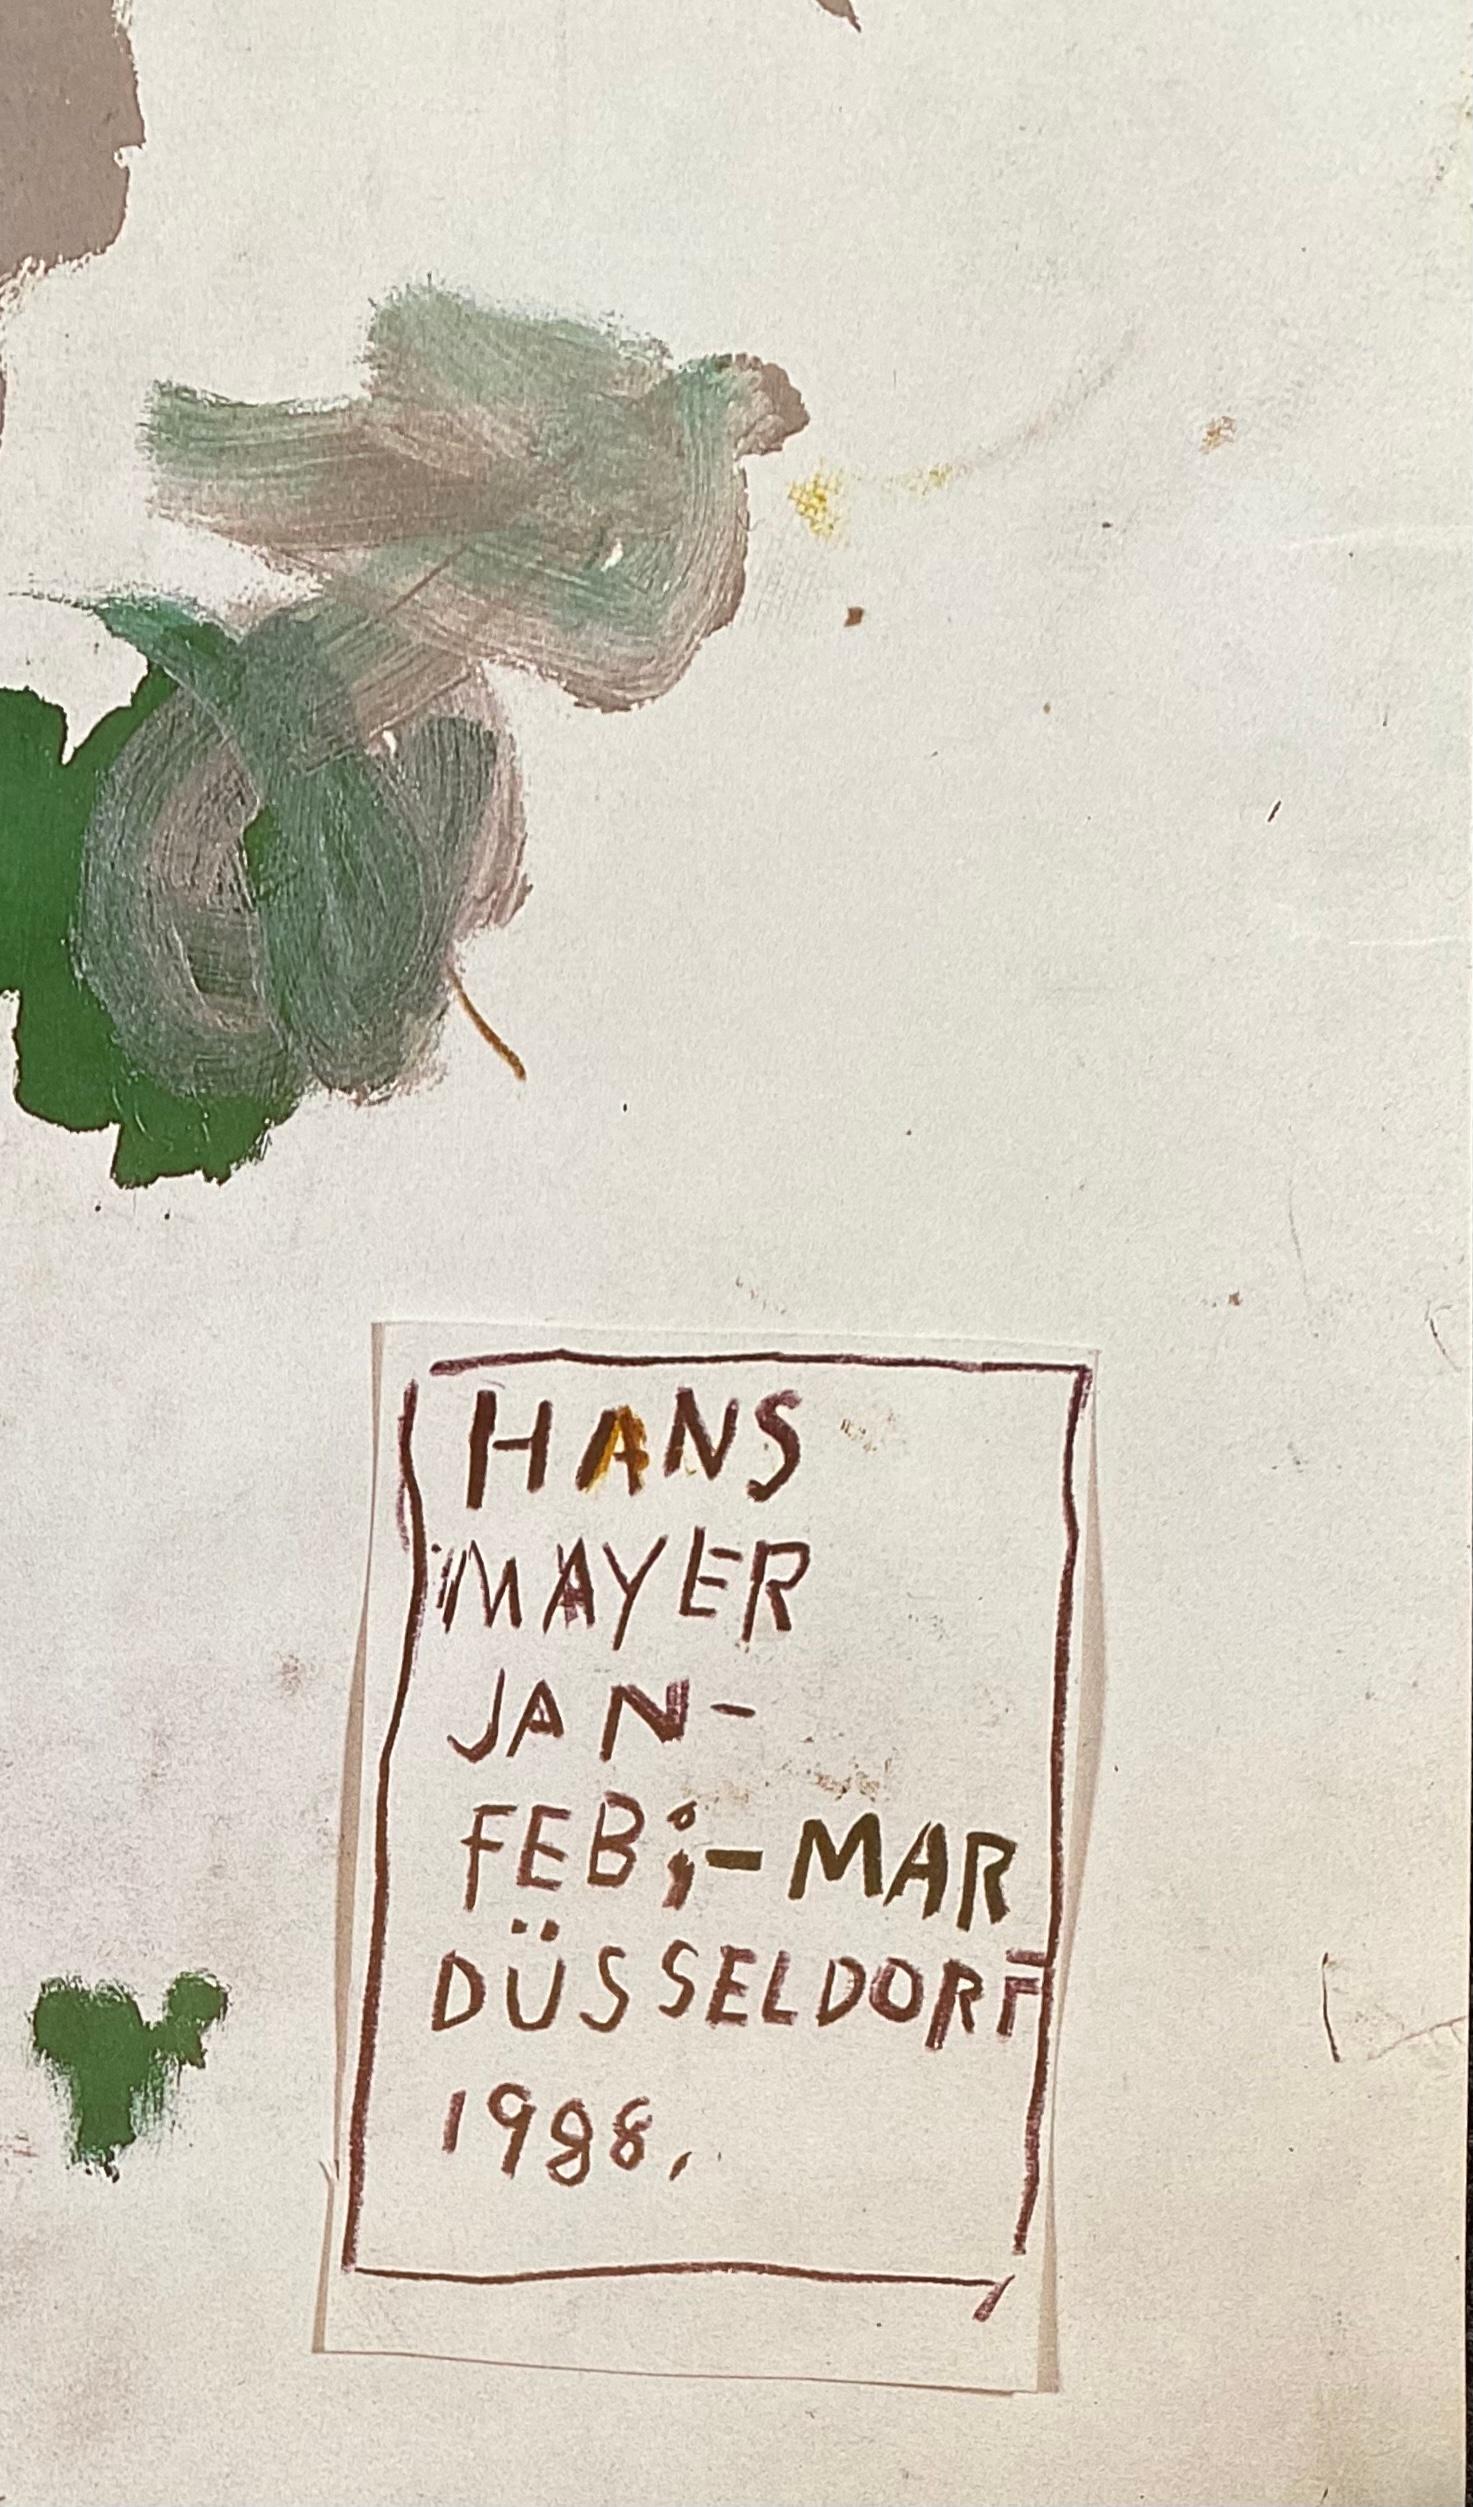 Basquiat Galerie Hans Mayer Düsseldorf 1988: 
A rare, exceptional 1980s Basquiat illustrated exhibition poster published on the occasion of 'Jean-Michel Basquiat at Galerie Hans Mayer Düsseldorf, Grabbeplatz 2 Jan 1st – Mar 31st 1988'. 

A standout